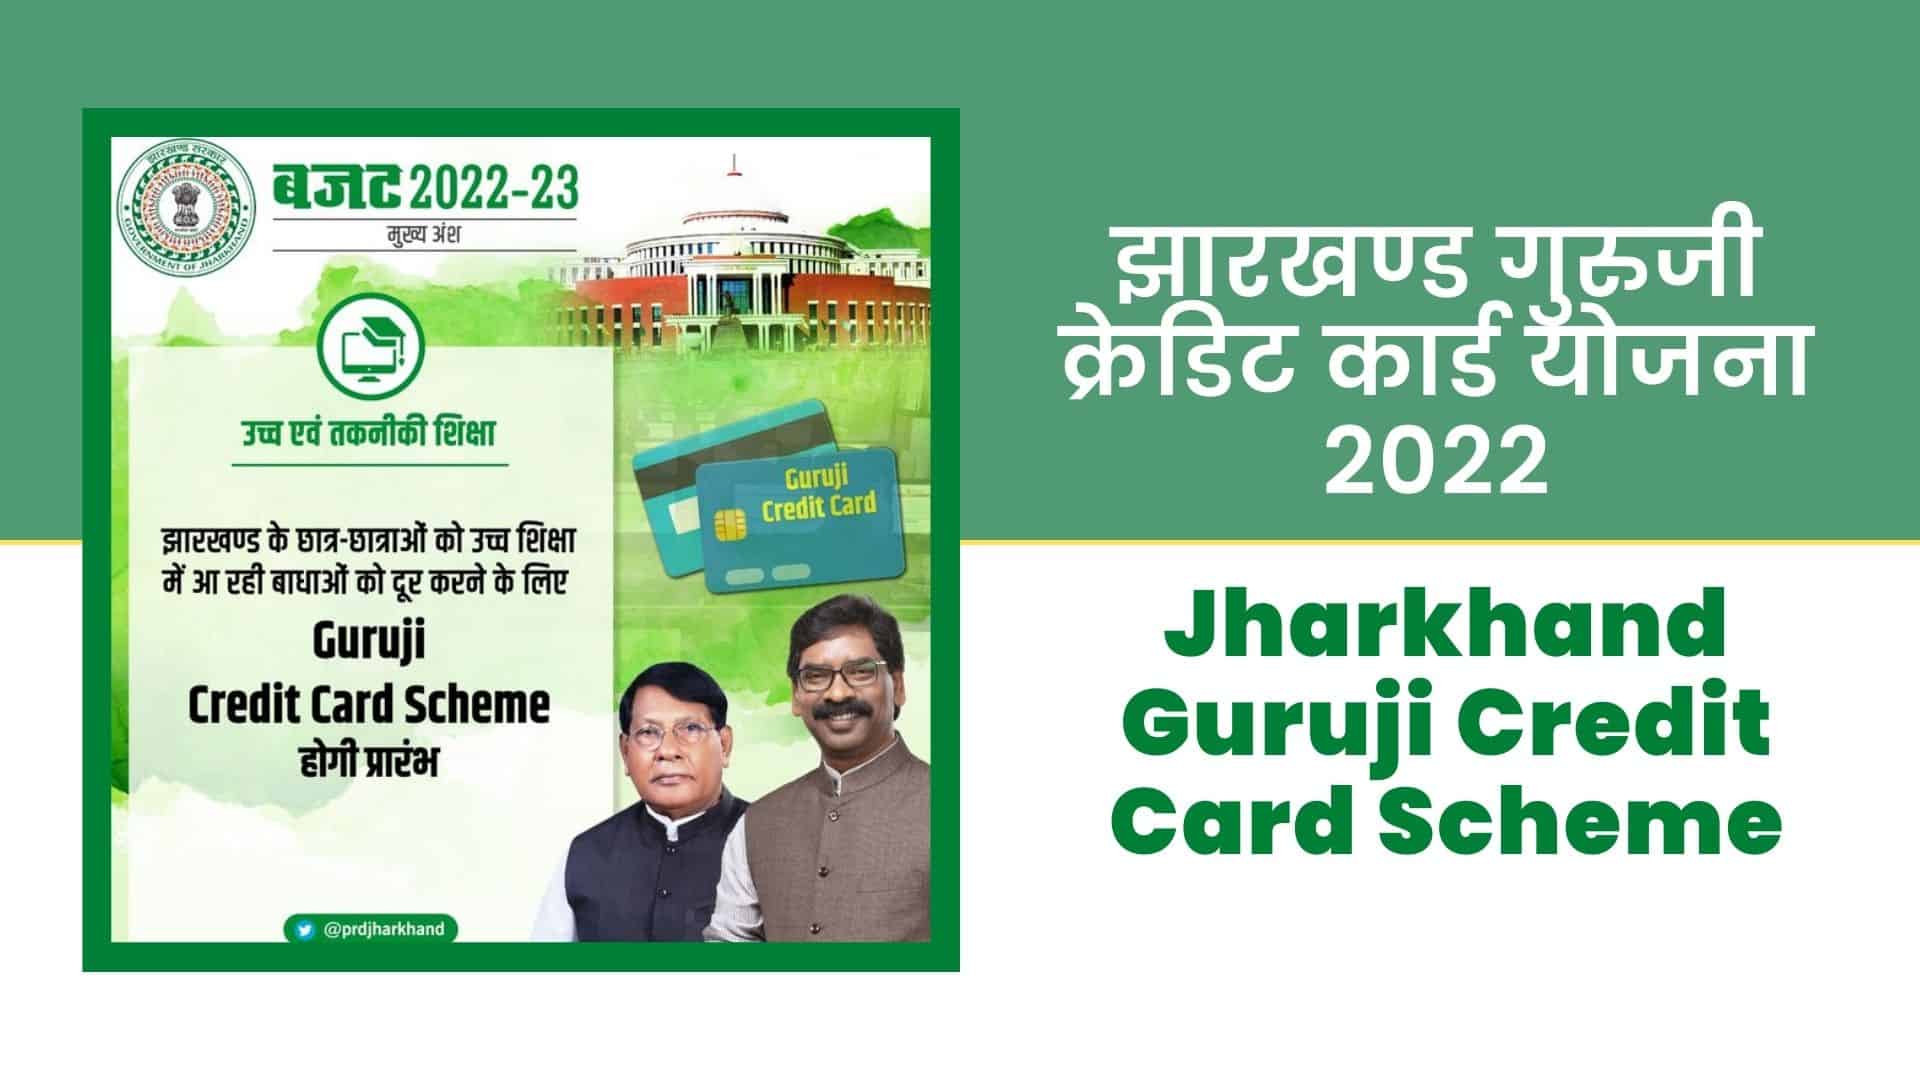 Guruji Credit Card Scheme: 4 months on, students await help promised by Jharkhand for educational loans